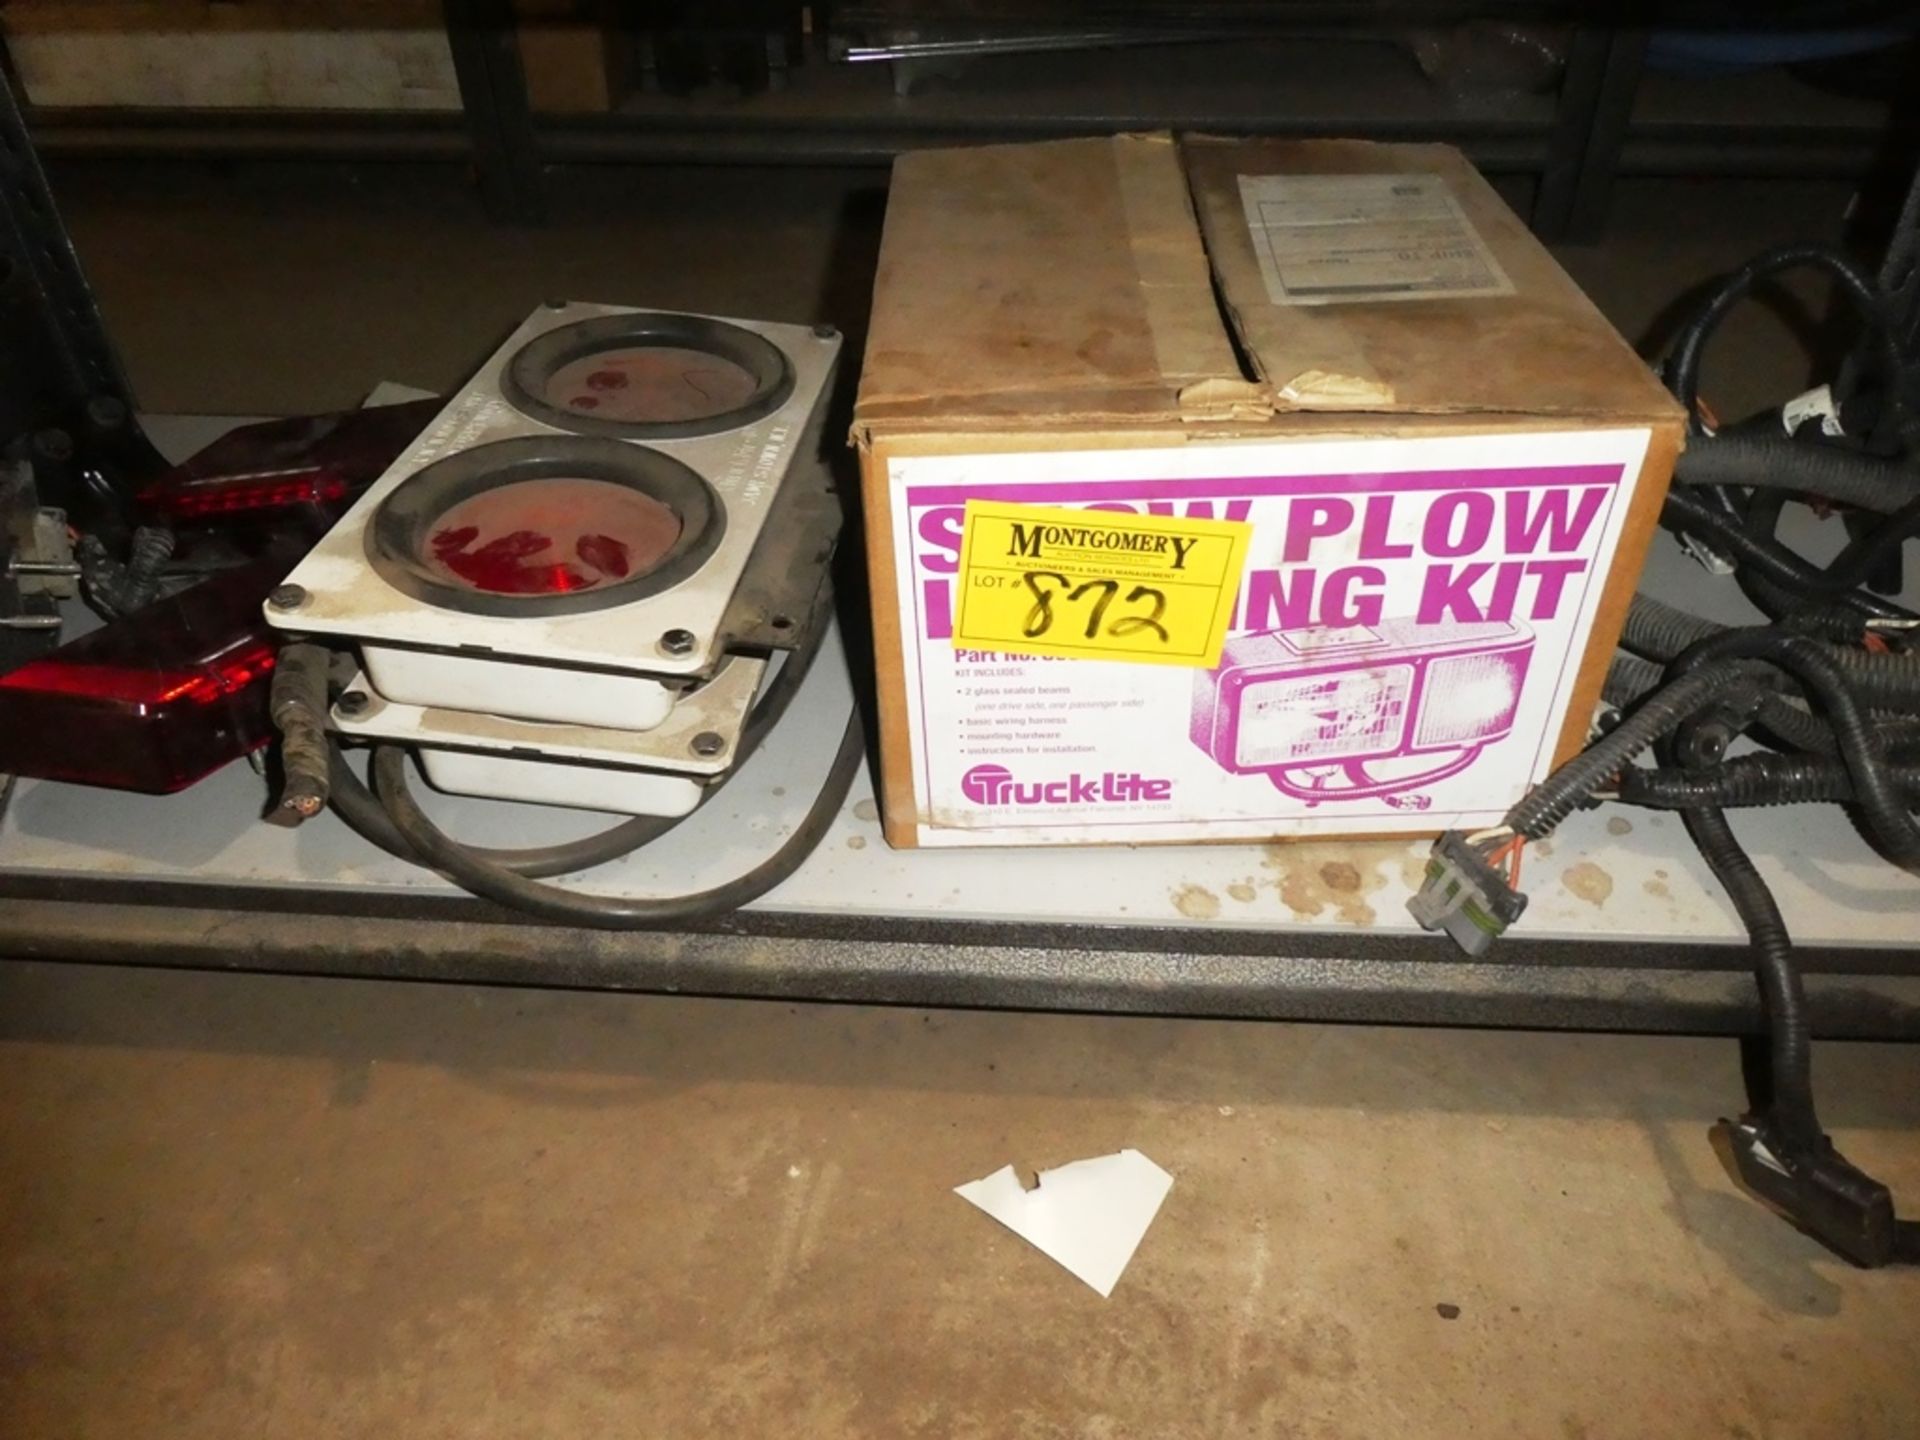 L/O SNOW PLOW LIGHTING KIT, ELECTRICAL HARNESSES, REPLACEMENT LIGHTS, ETC